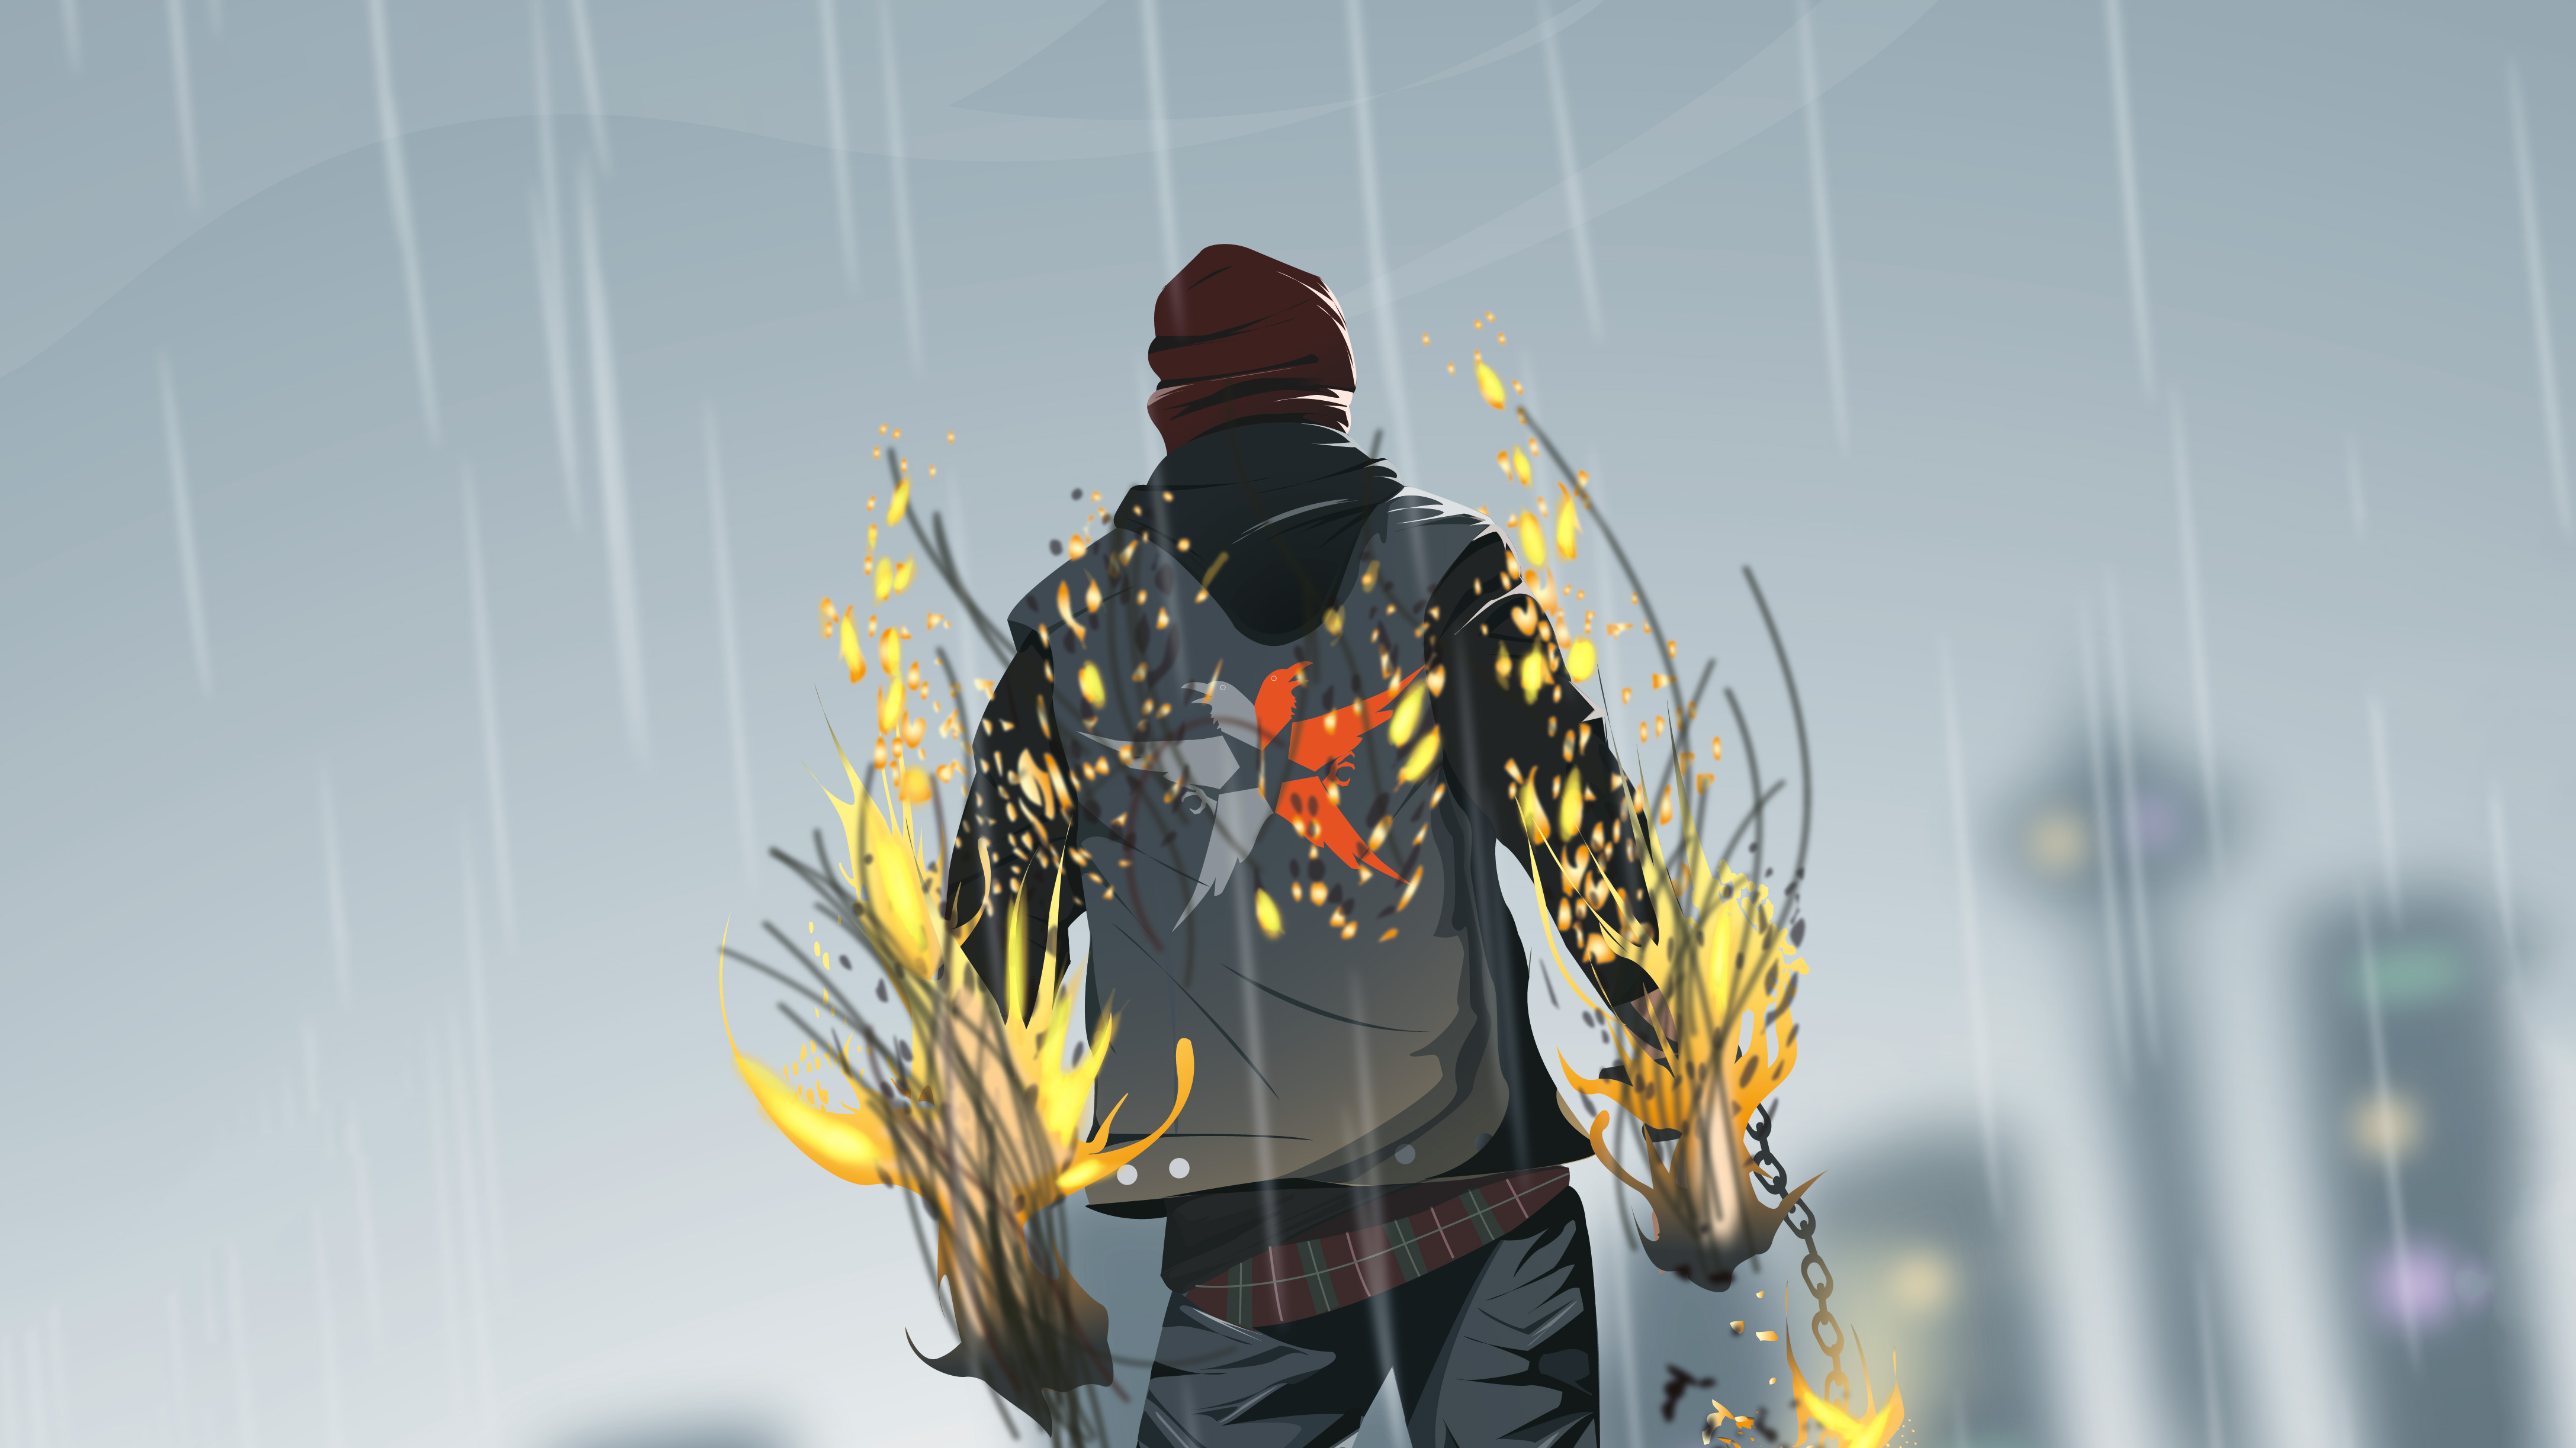 inFAMOUS: Second Son Wallpapers